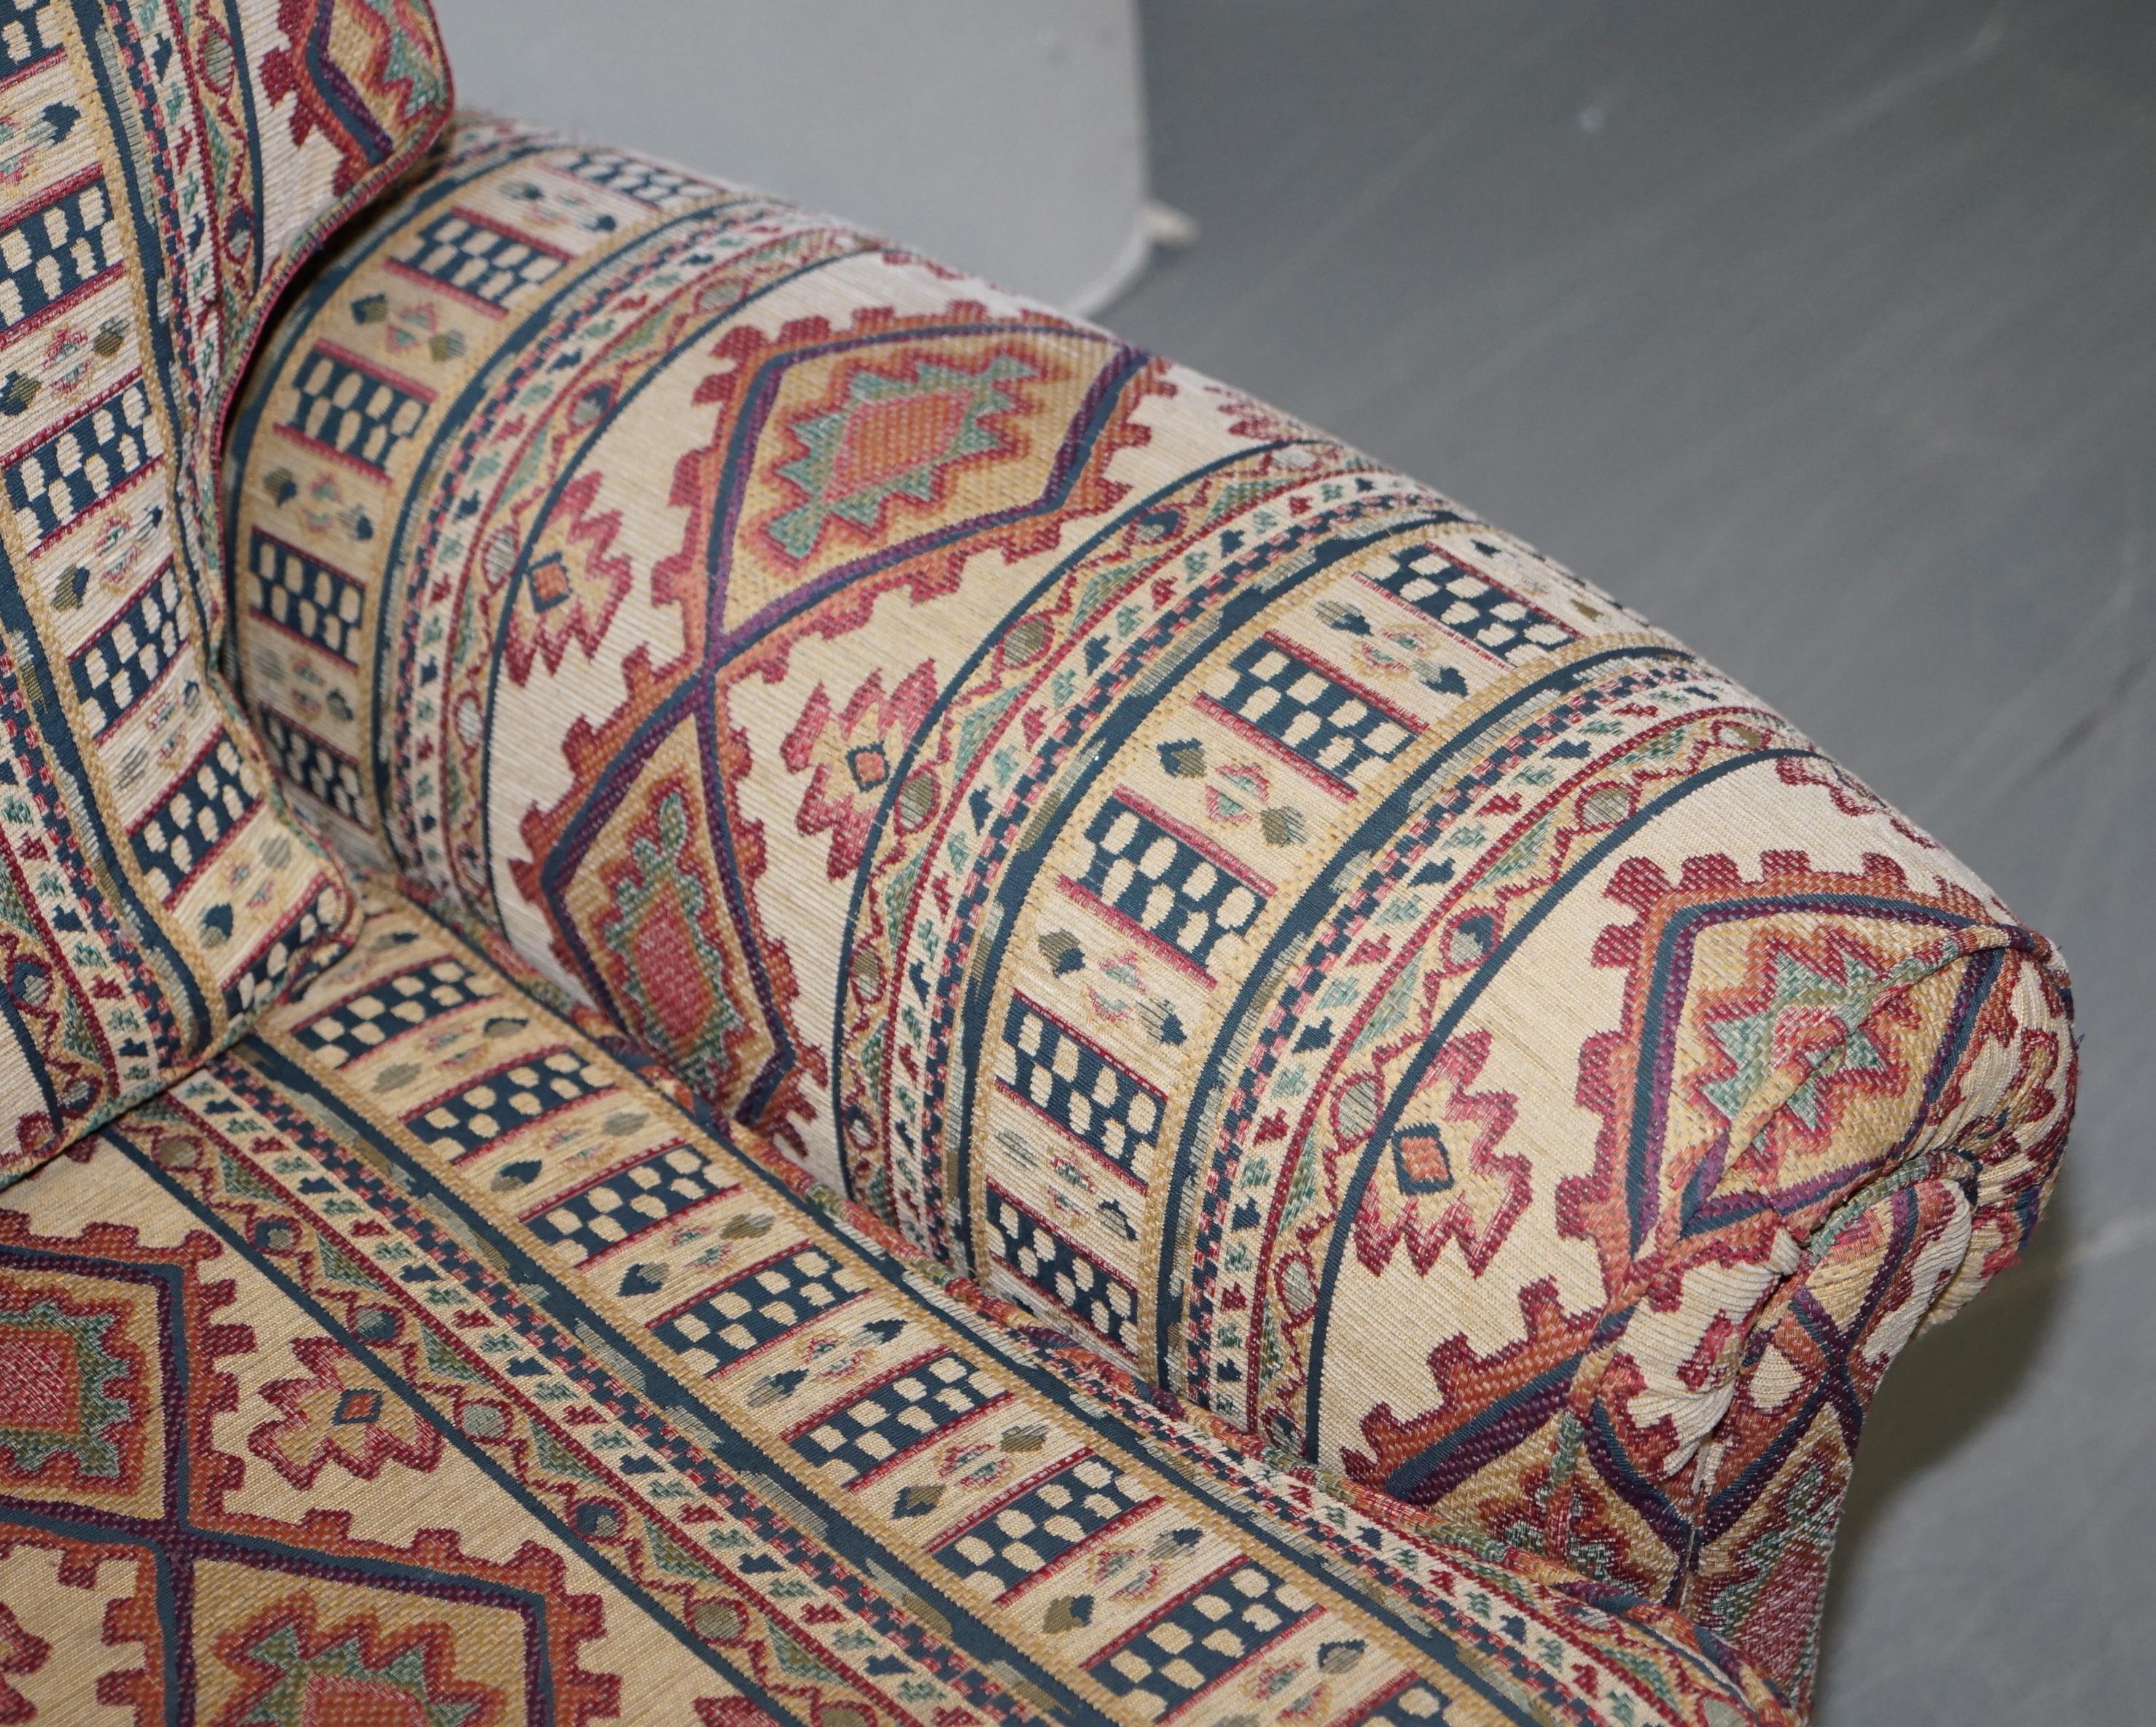 Midcentury Fully Sprung Art Deco Style Kilim Rug Upholstered Sofa Part of Suite For Sale 1